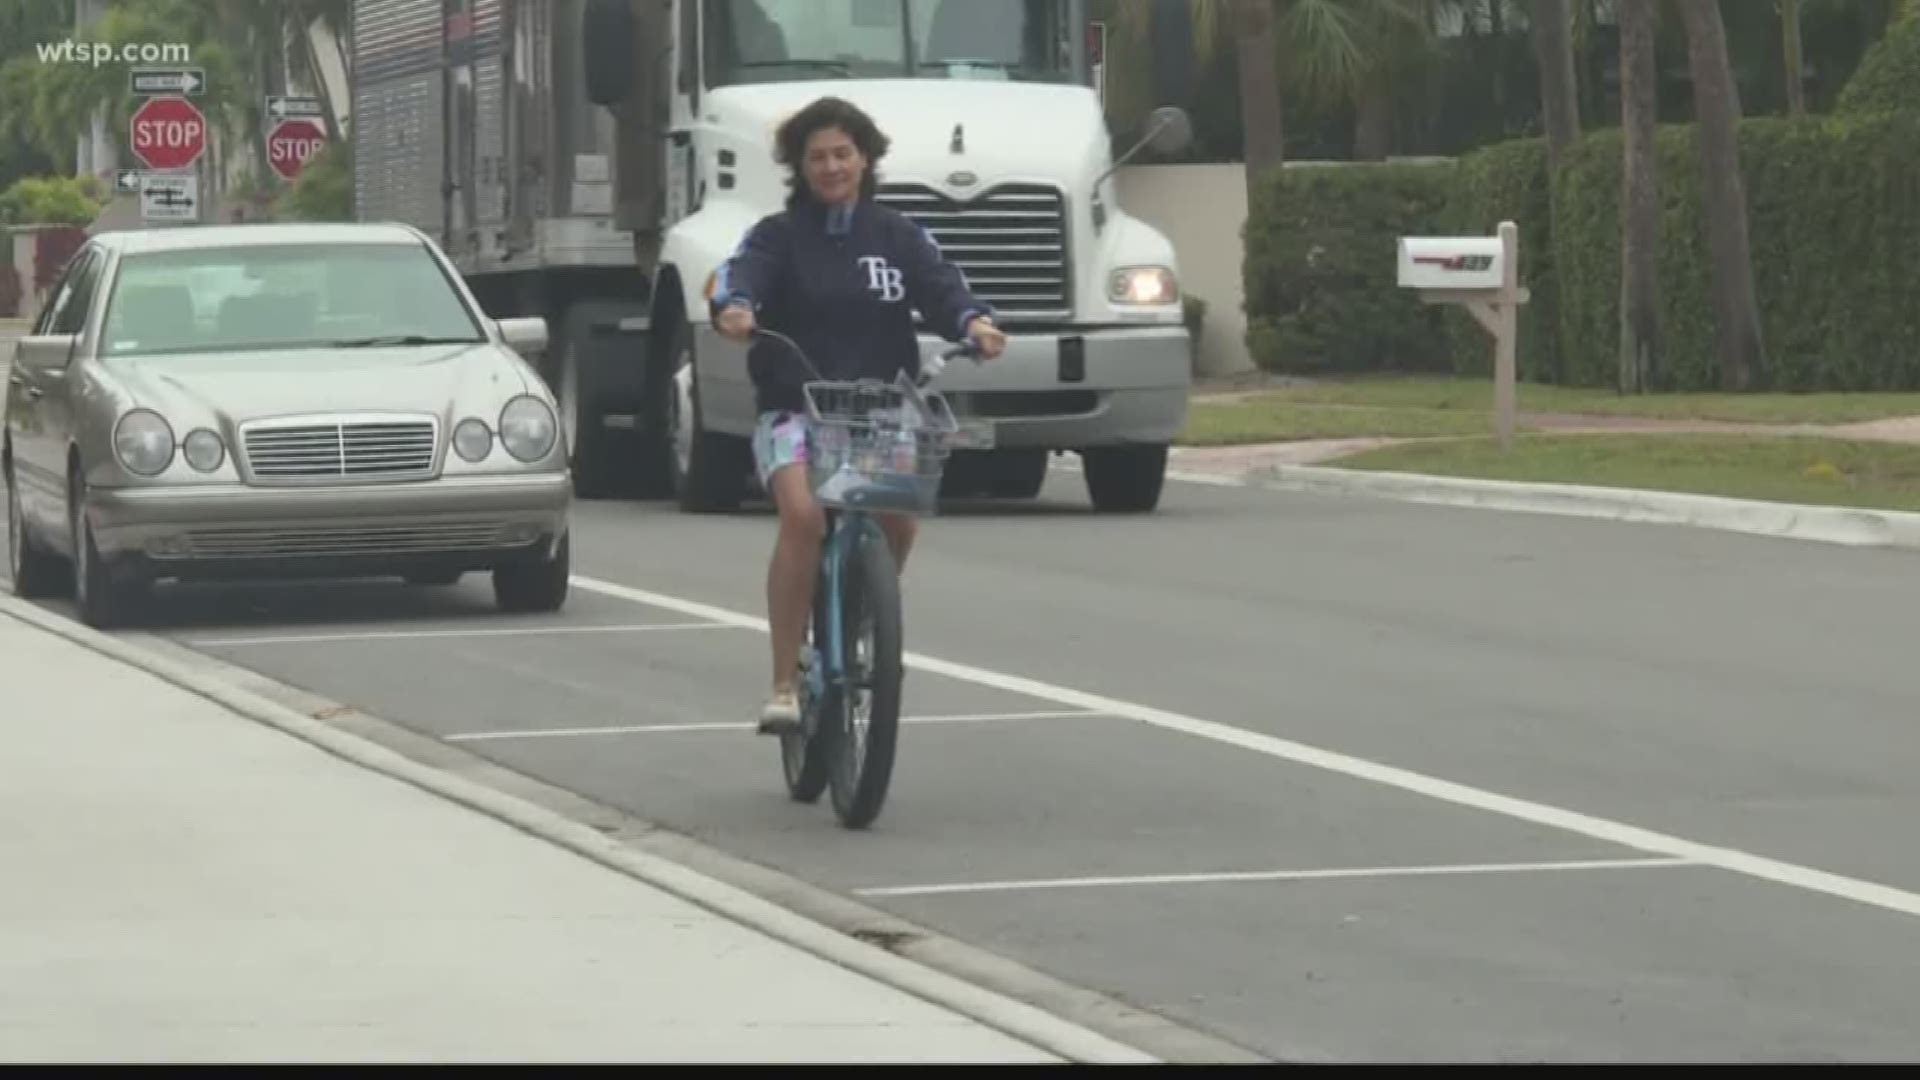 The city has teamed up with I Bike Sarasota to offer bike rentals for the hour or the day.